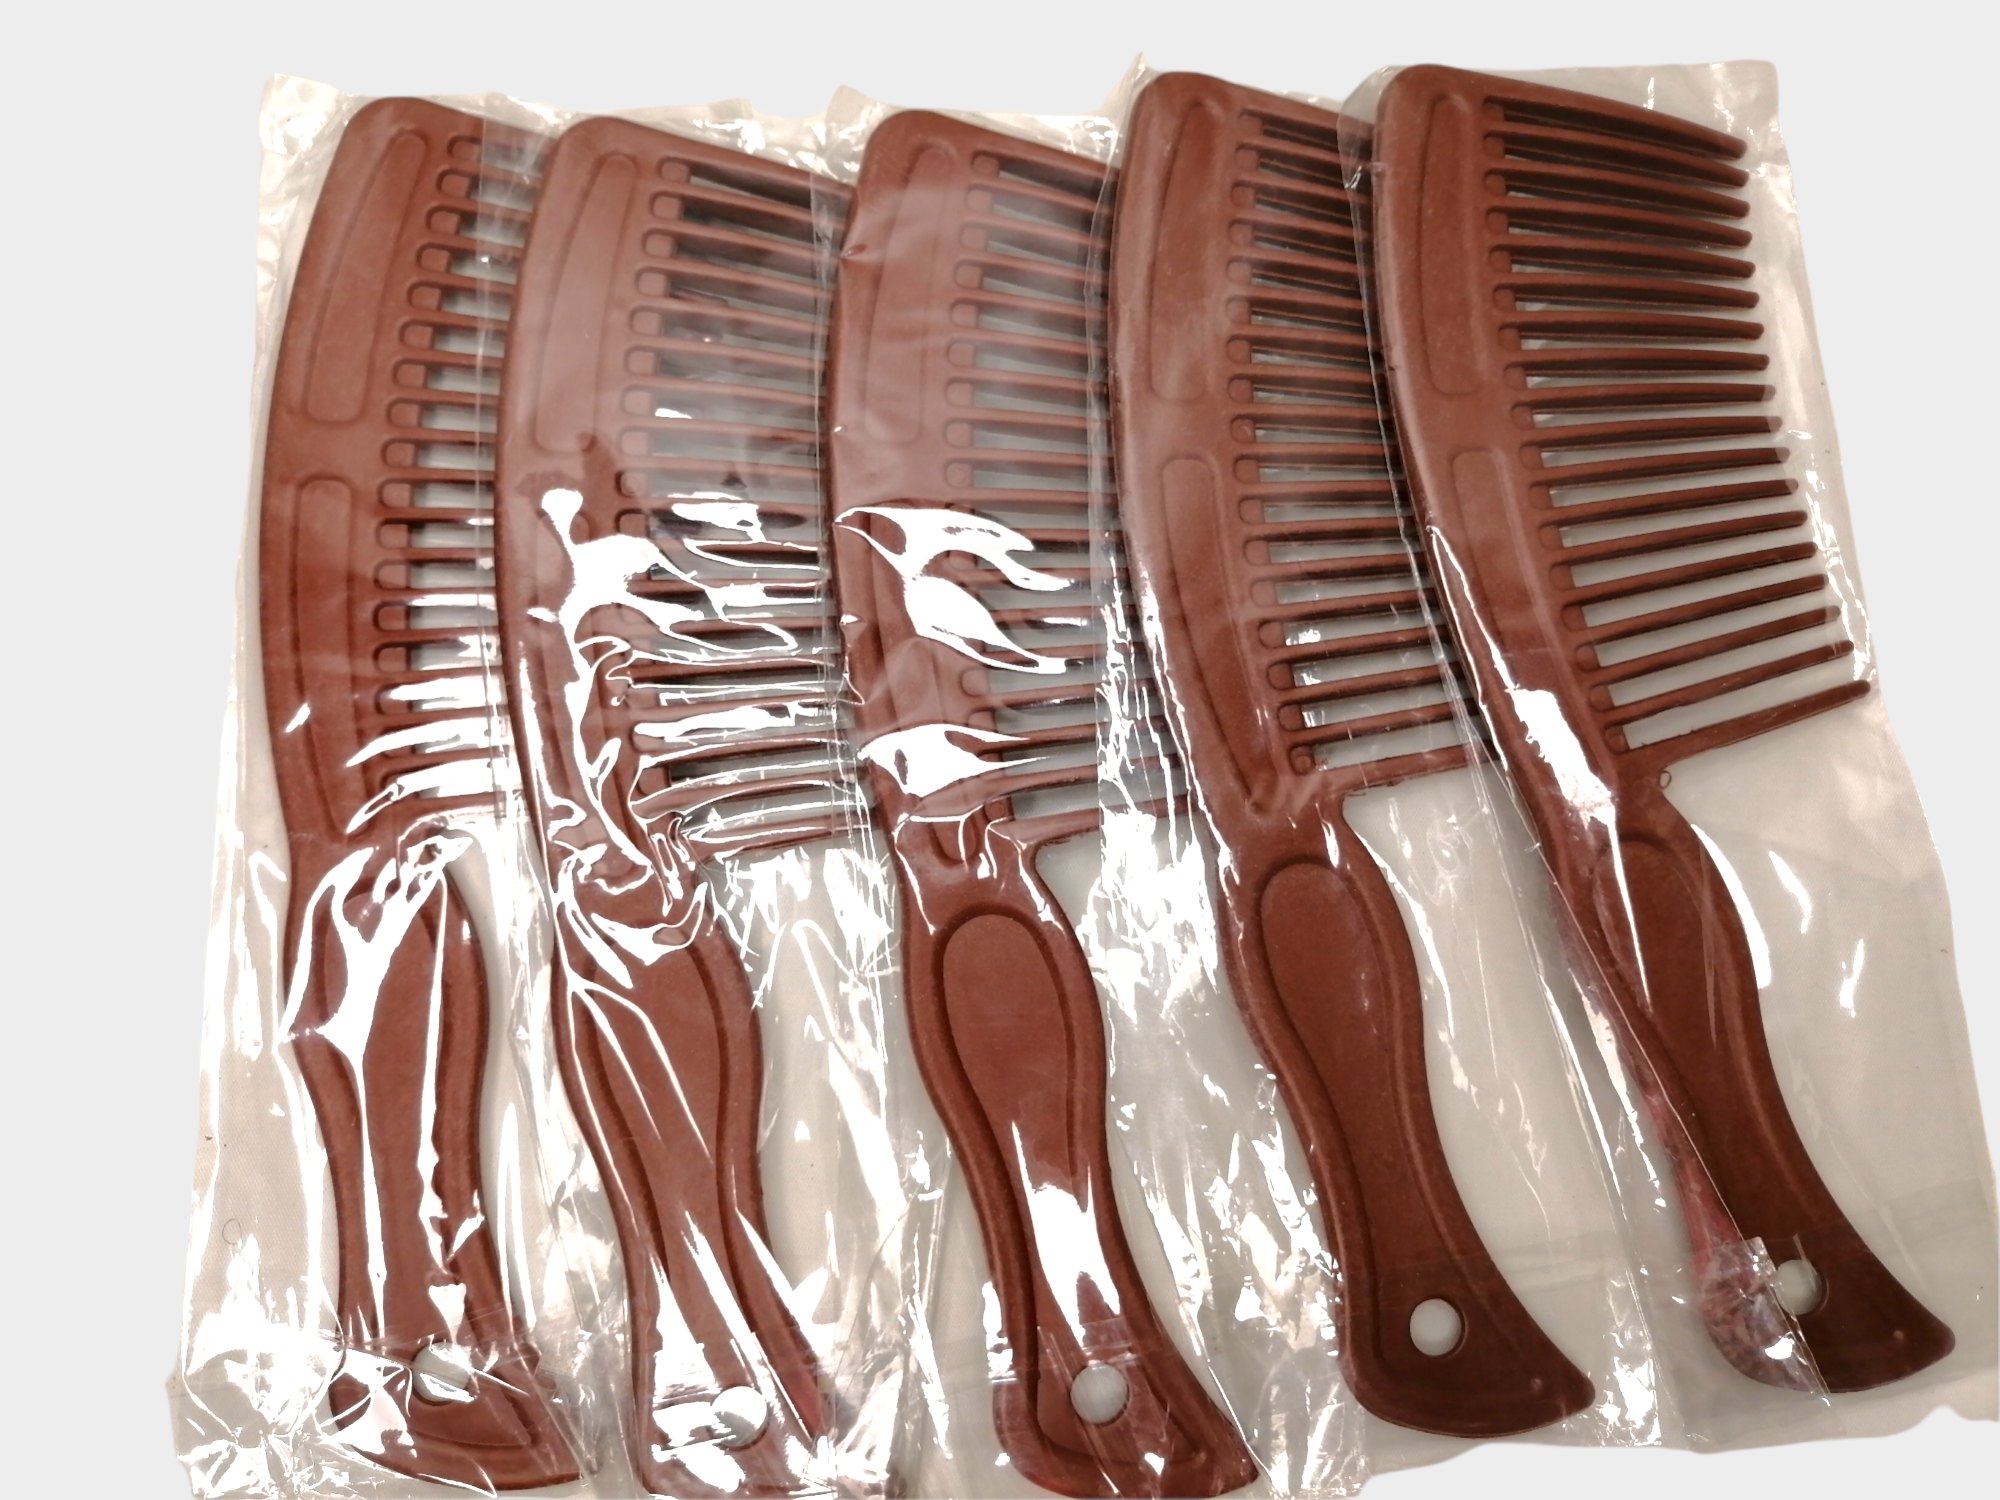 PROFESSIONAL PLASTIC AFRO HAIR COMB STYLING/UNTANGLING Hair African Hair Black 